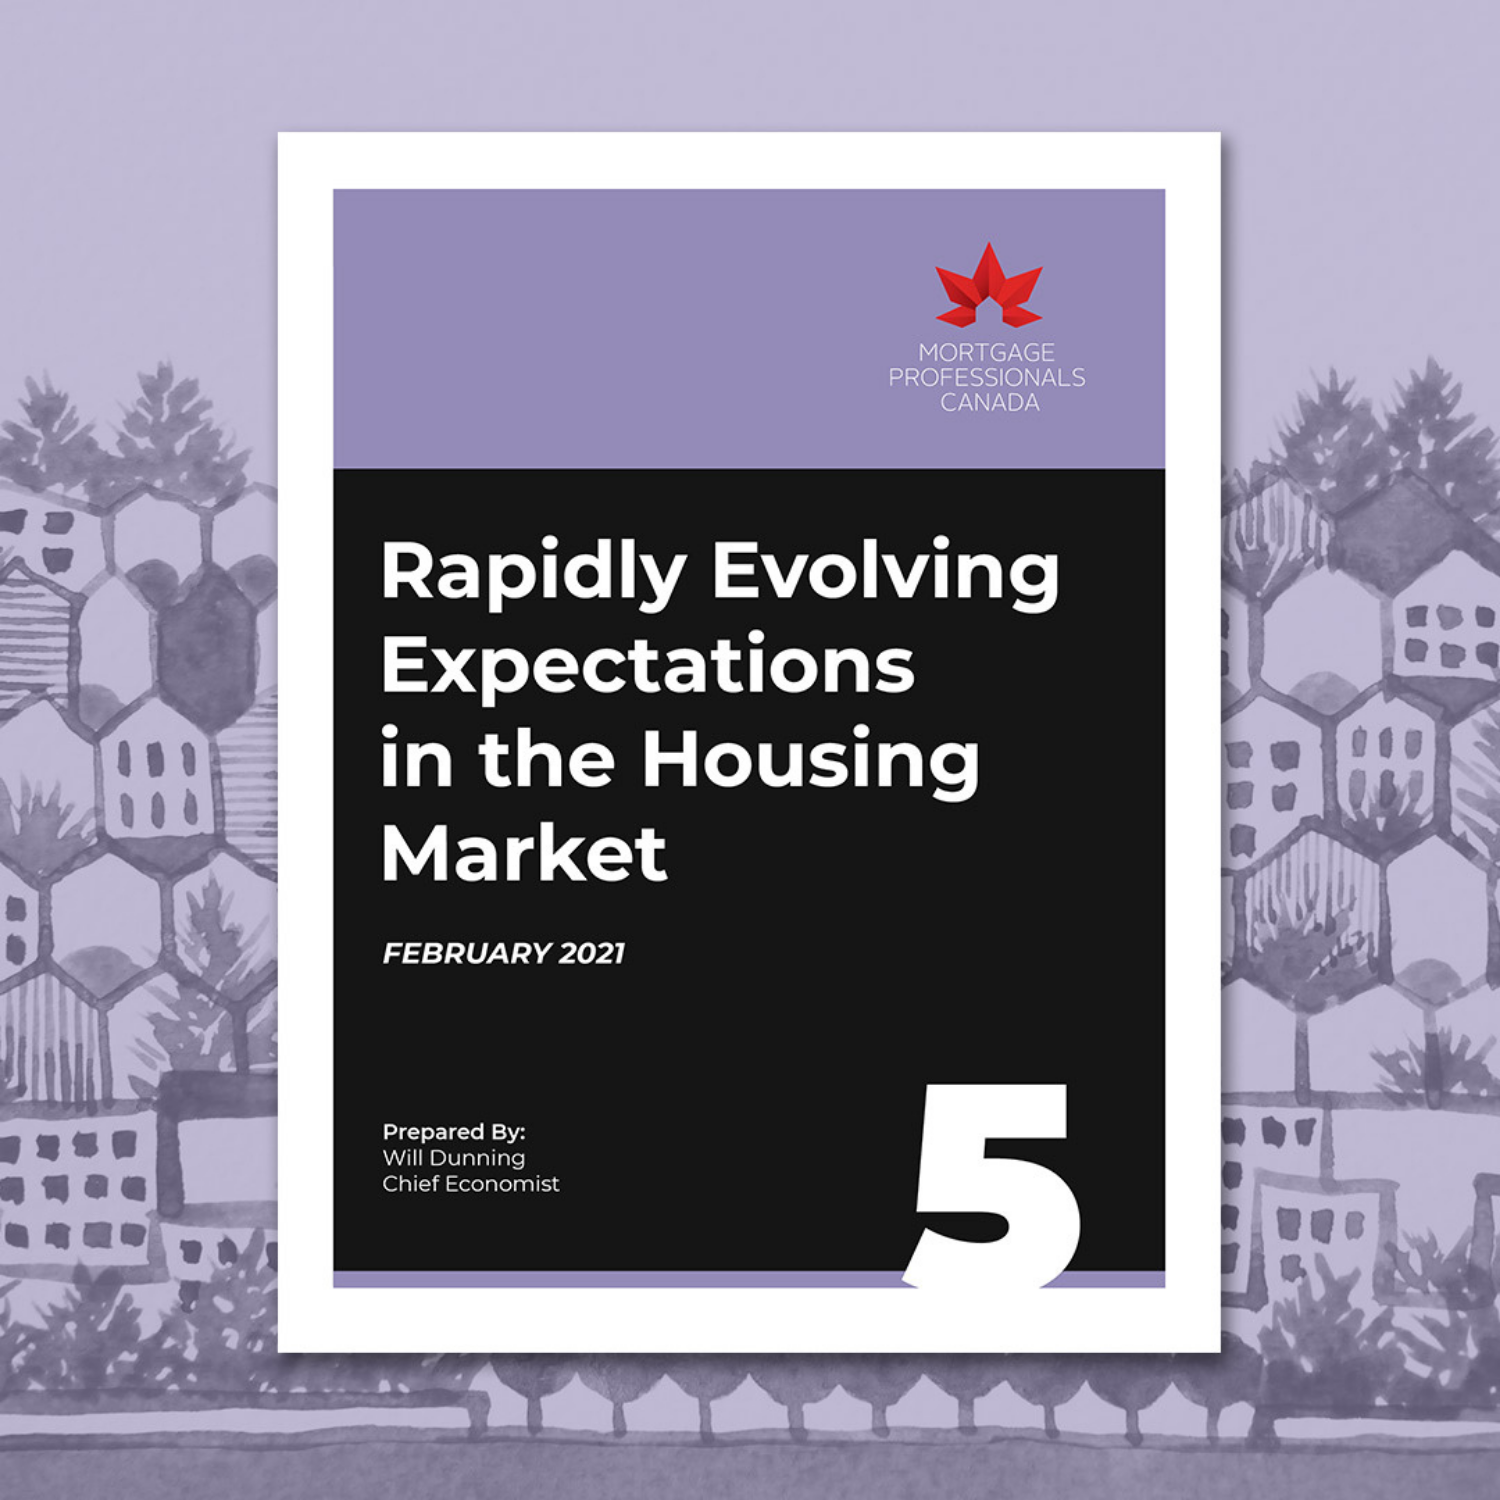 https://mortgageproscan.ca/home/urgent-updates/item/2021/02/10/fifth-rapidly-evolving-expectations-in-the-housing-market-report-released